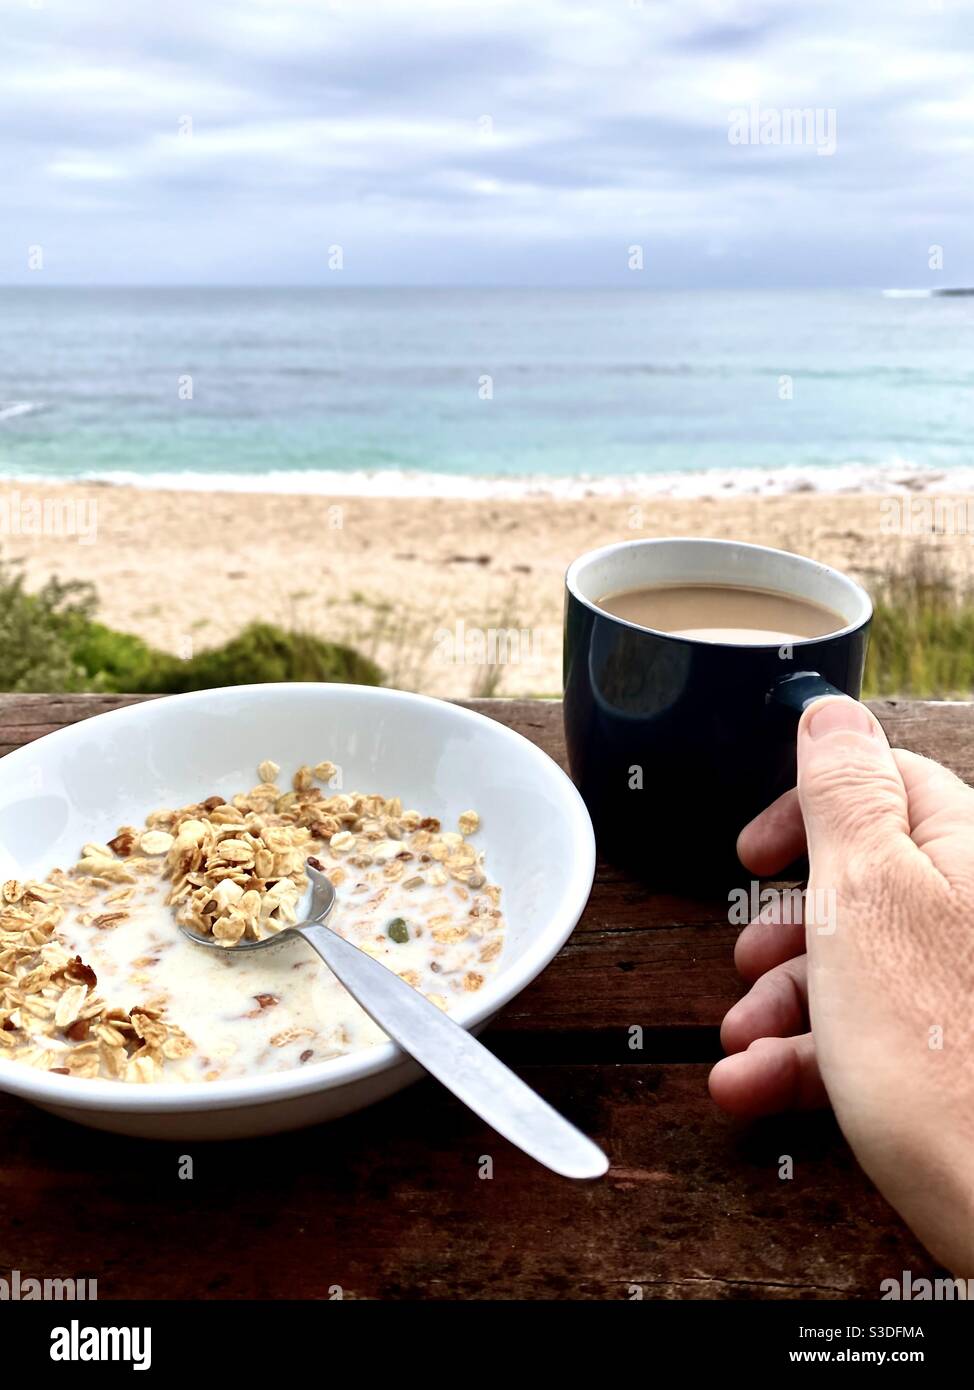 Person enjoys a scenic coastal beach view on a cloudy morning over while having a coffee and breakfast muesli. Concept lifestyle, travel tranquility and recreation. Stock Photo